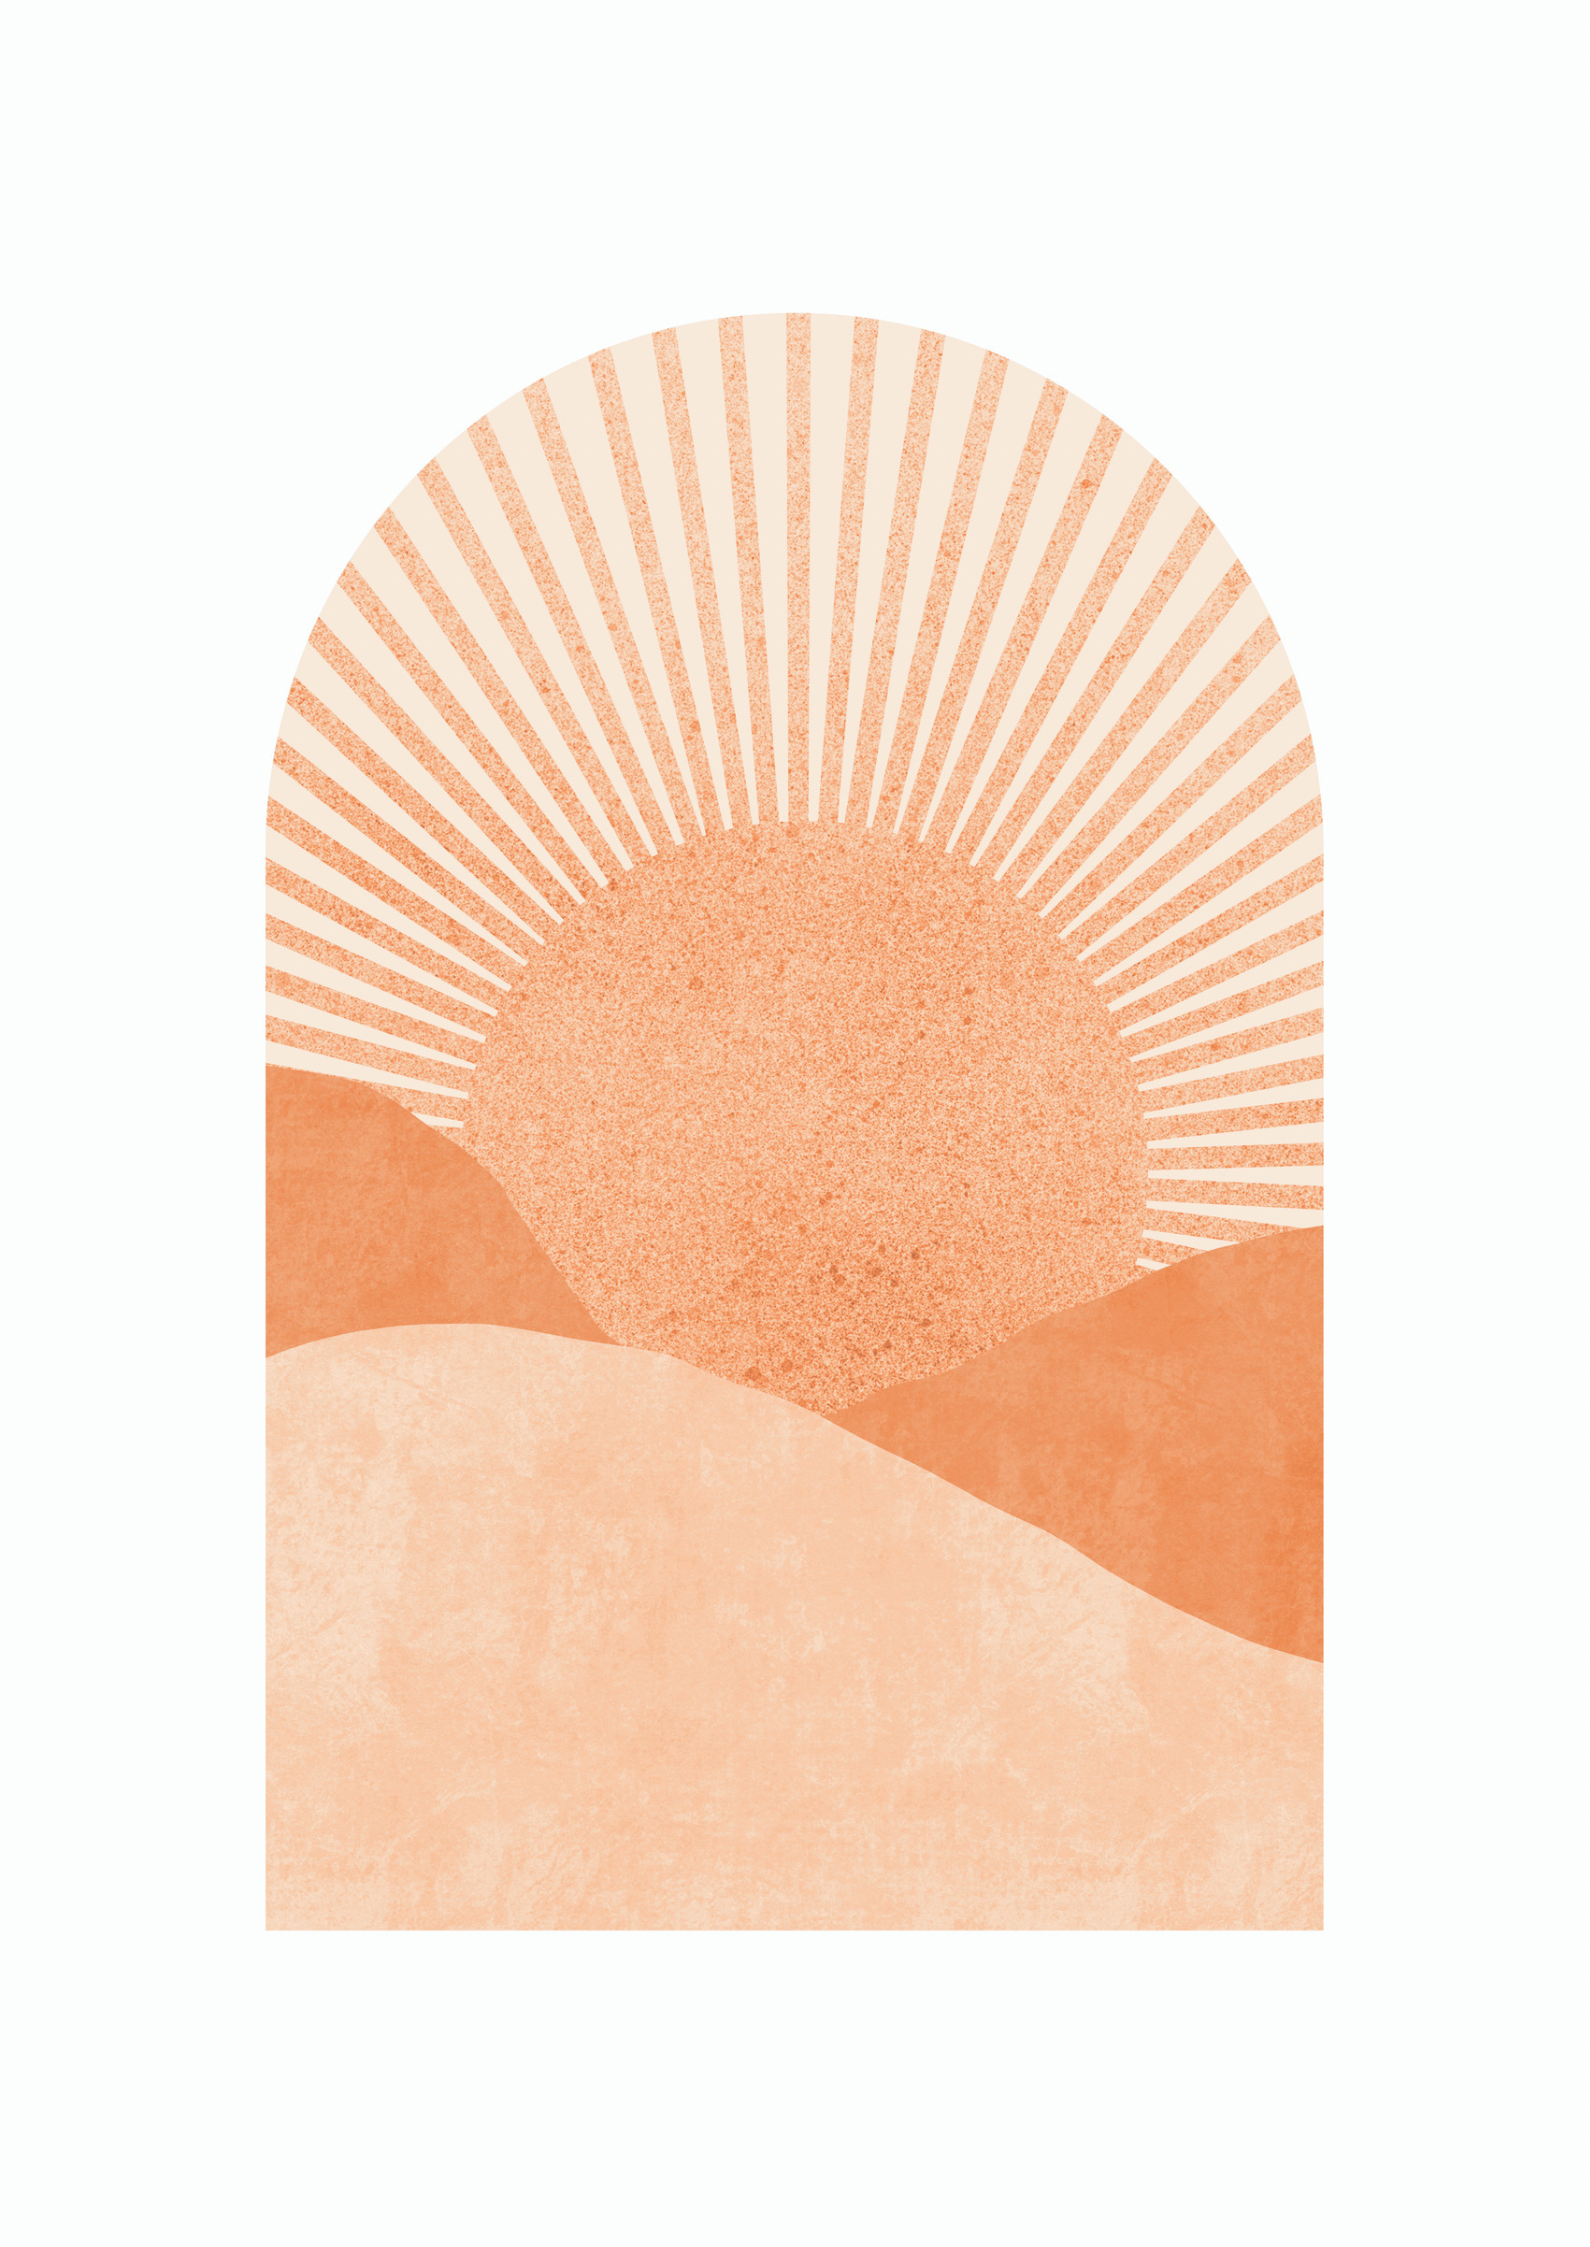 The Arched Sunrise print